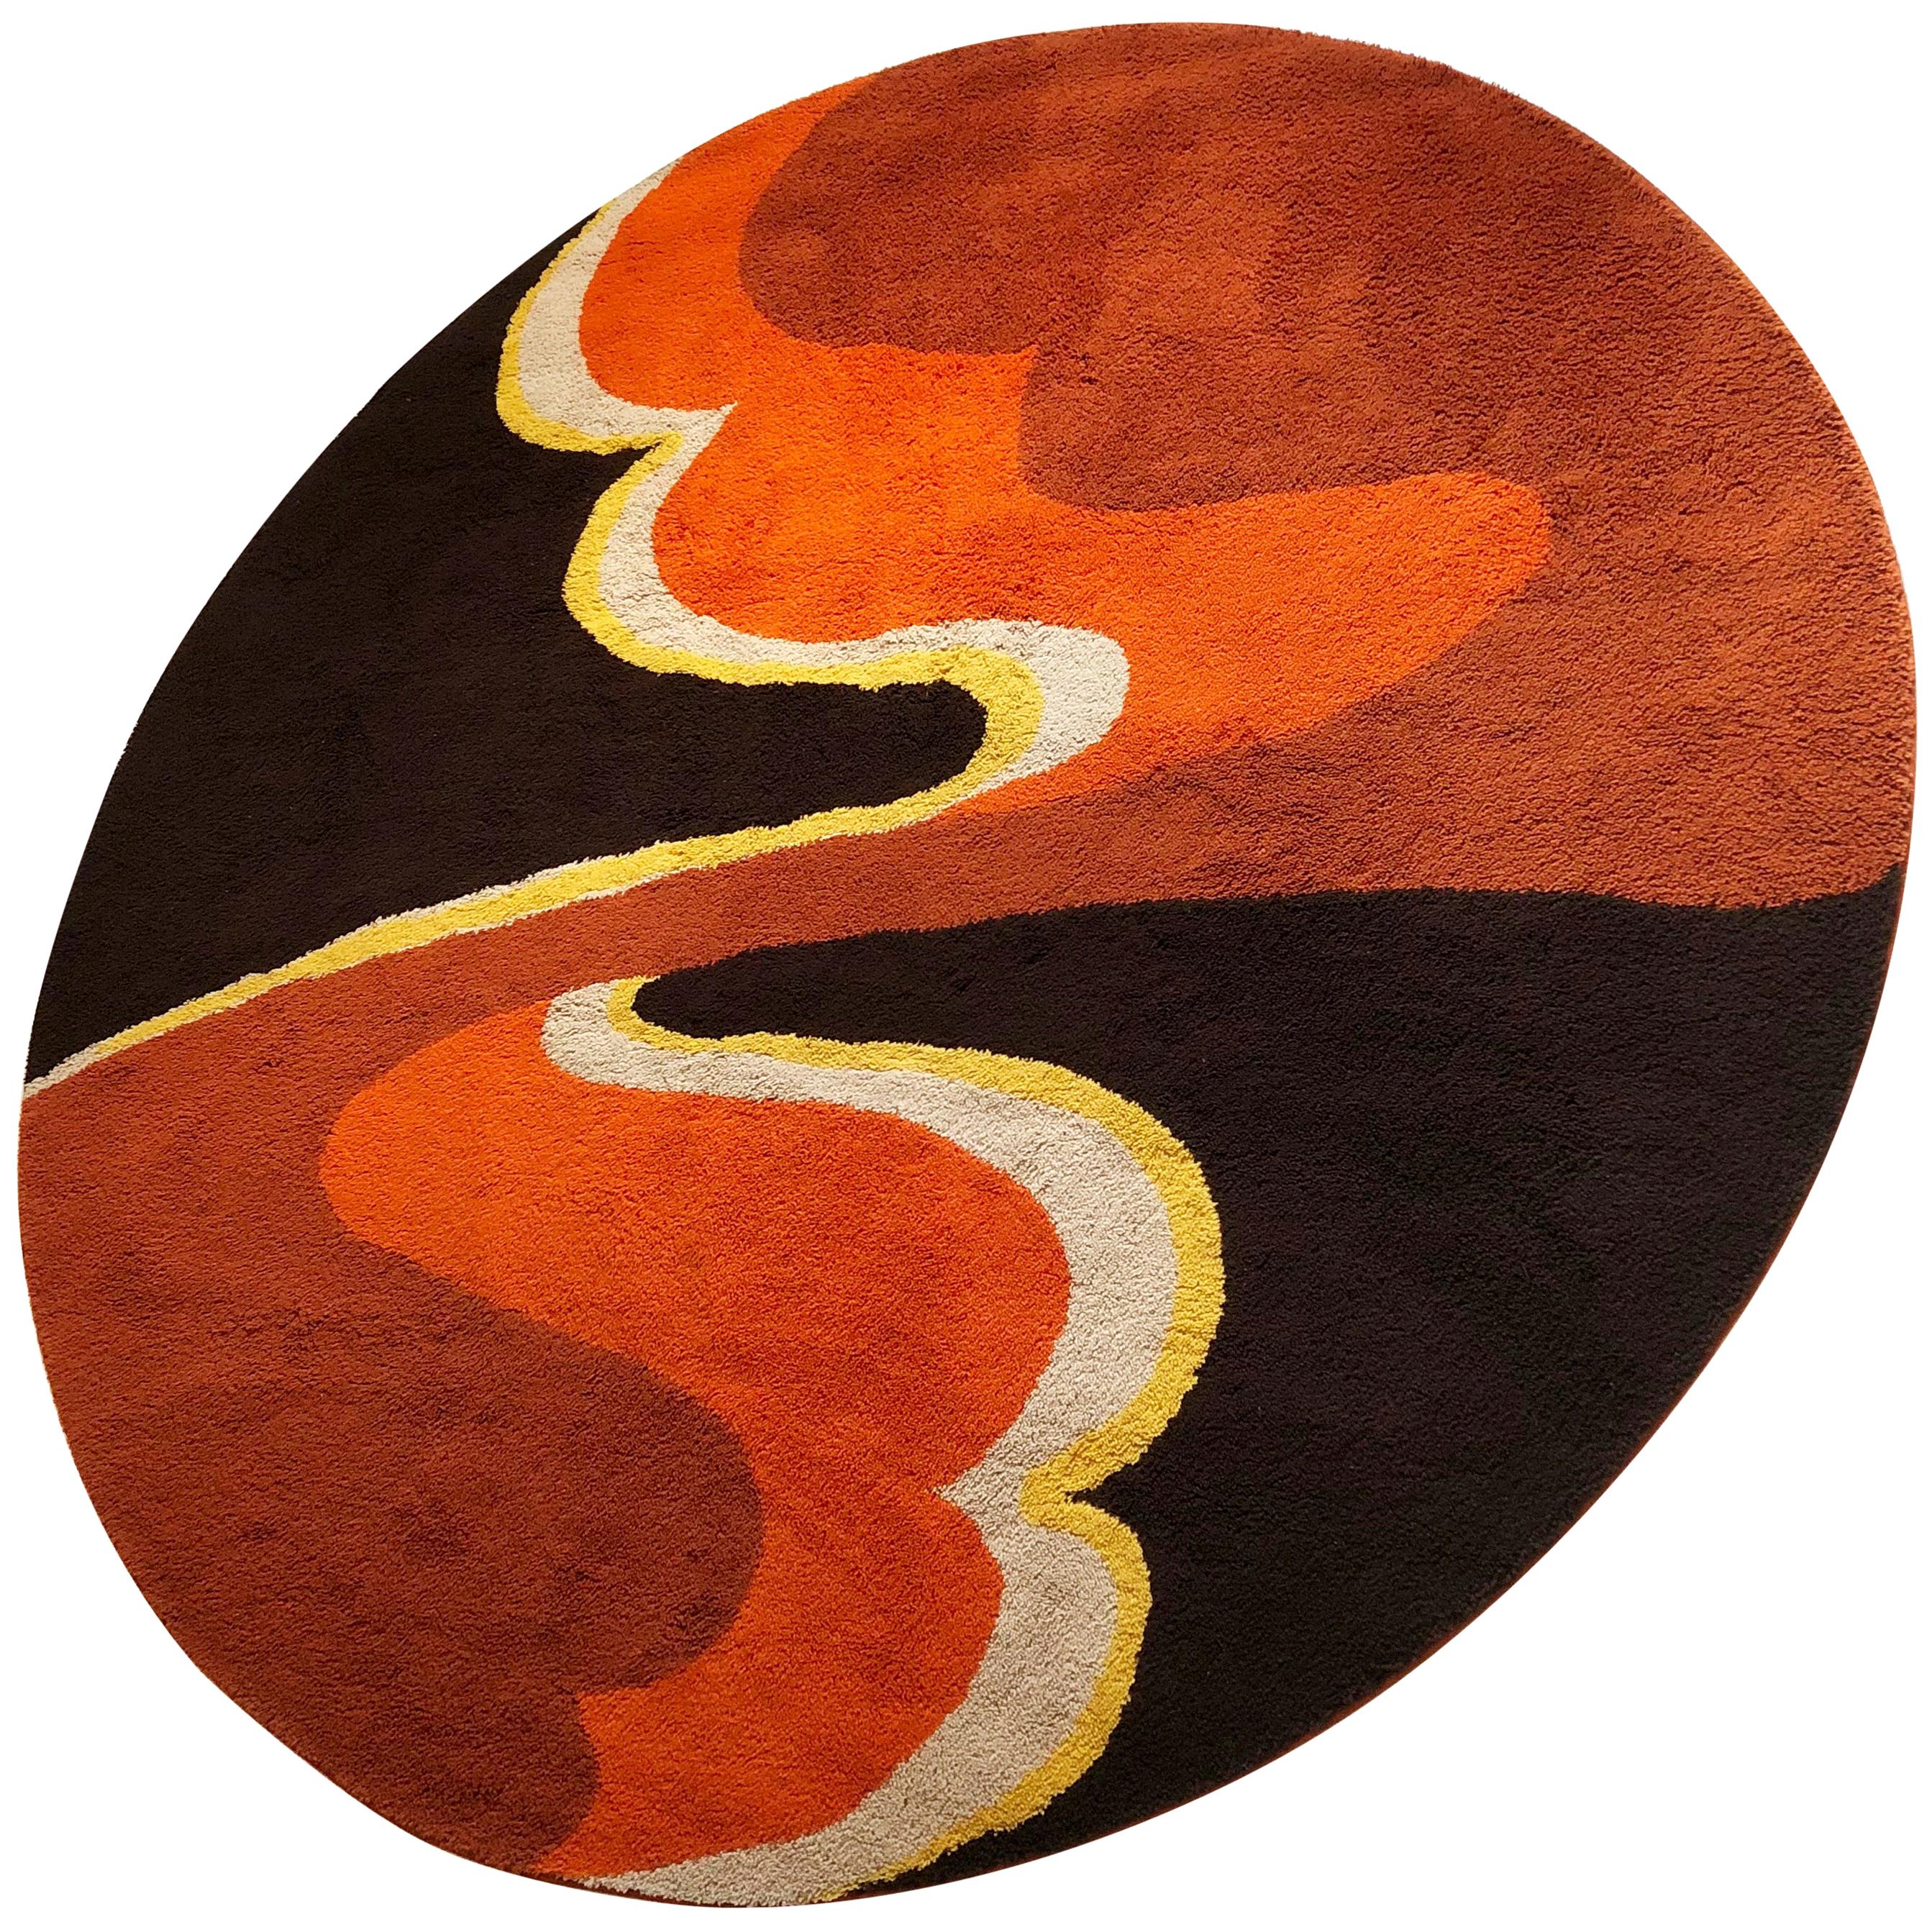 Large Psychedelic Panton High Pile Rug Carpet by Cromwell Tefzet, Germany